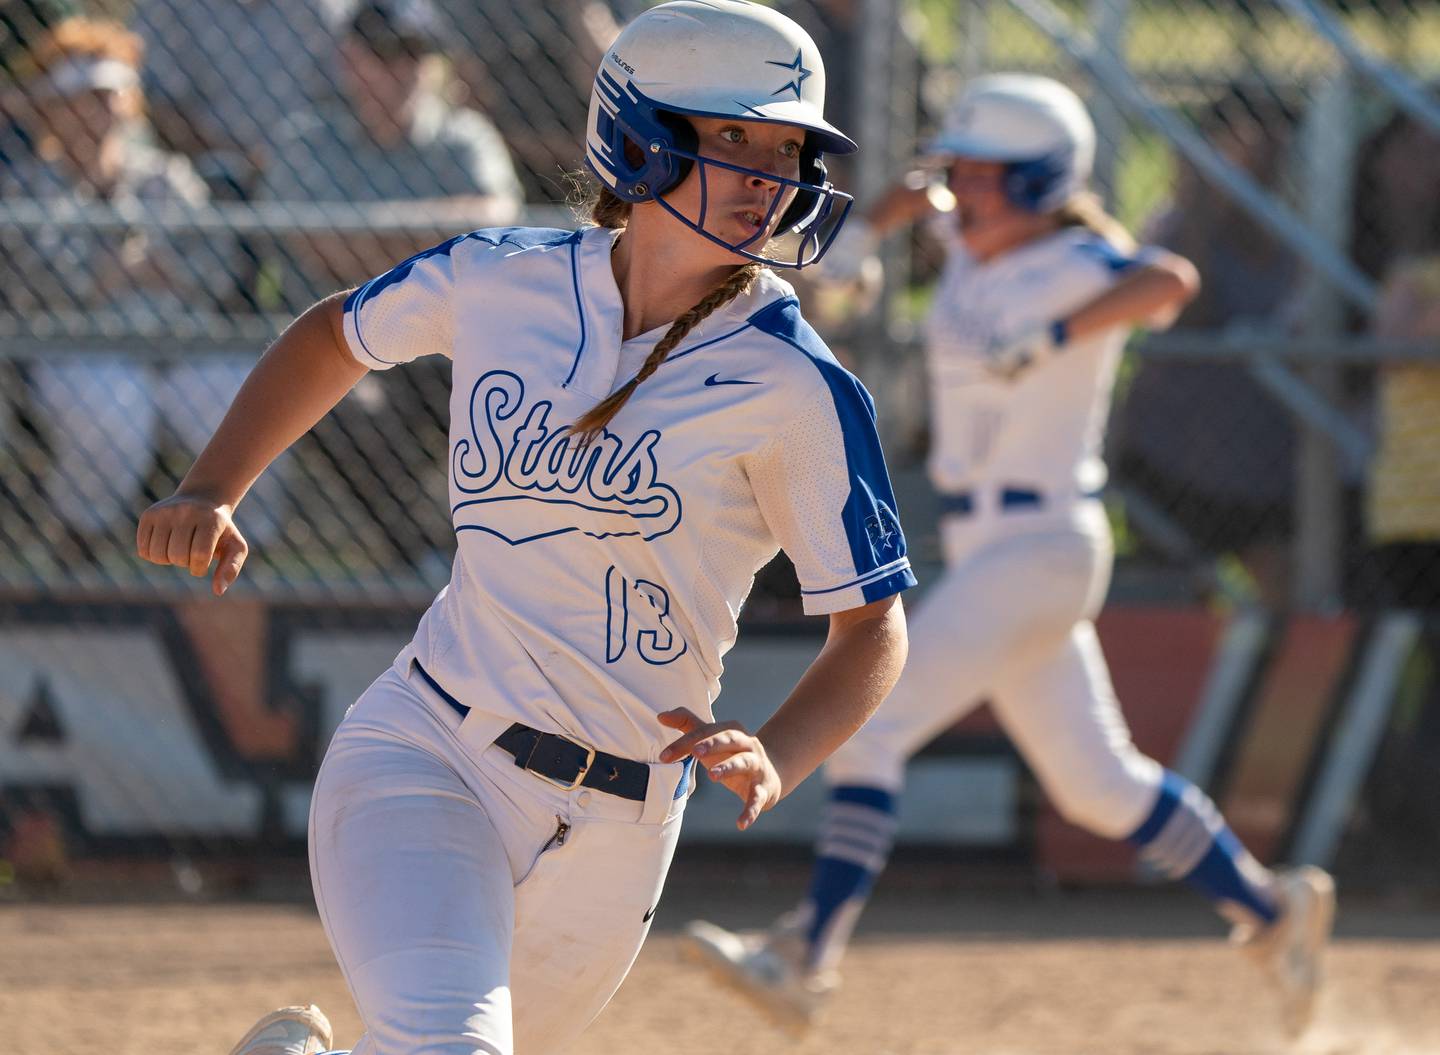 St. Charles North's Margo Geary (13) hits a triple scoring three runs against Glenbard North during the St. Charles East 4A sectional championship at St.Charles East High School on Friday, Jun 3, 2022.